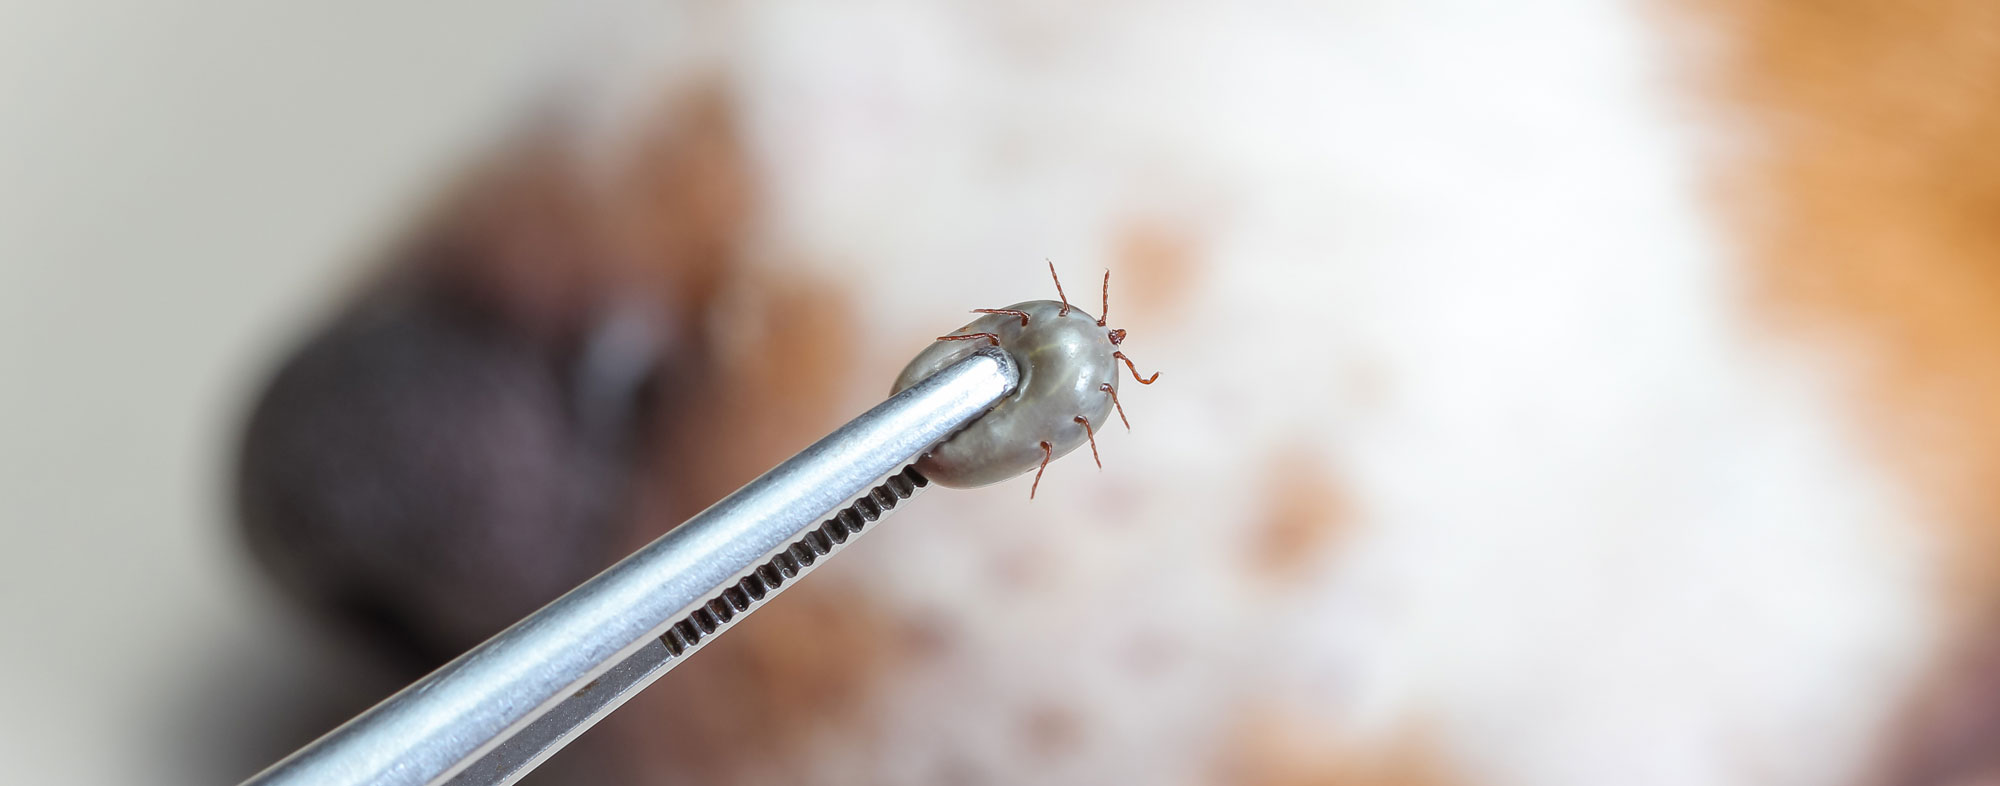 How To Safely Remove A Tick Without Tweezers Mice